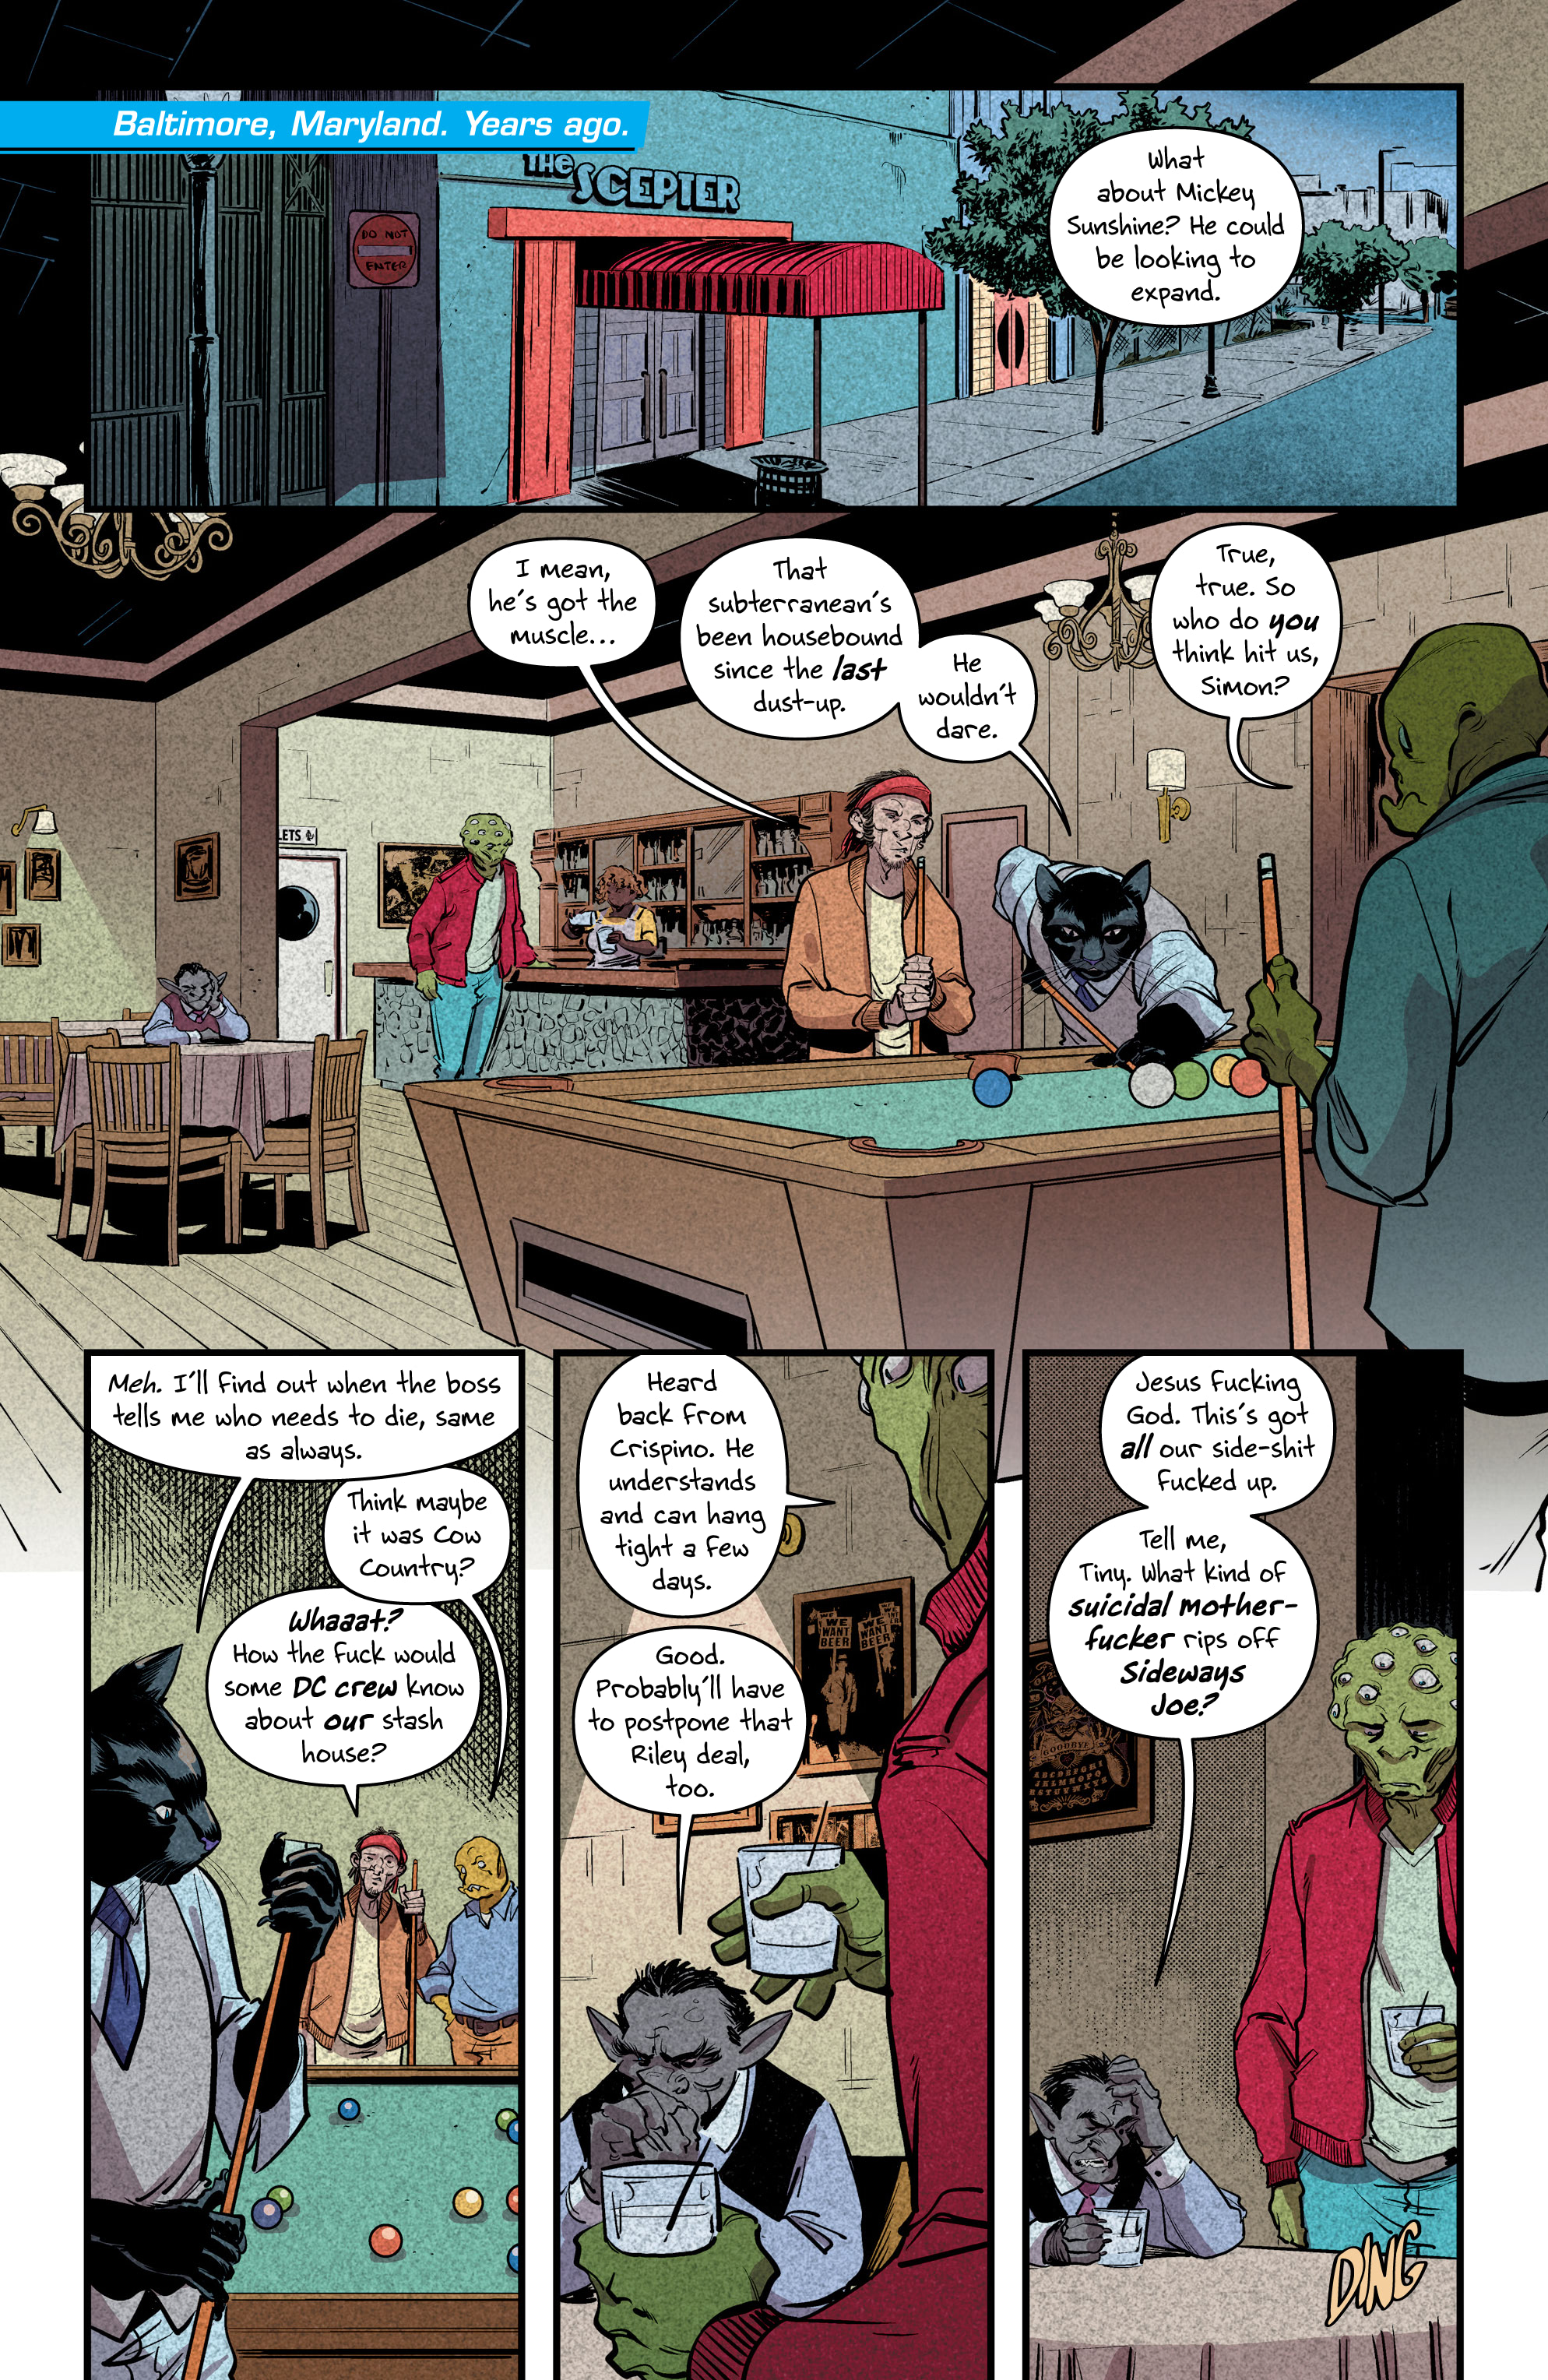 Grumble: Memphis & Beyond the Infinite (2020-): Chapter 3 - Page 3